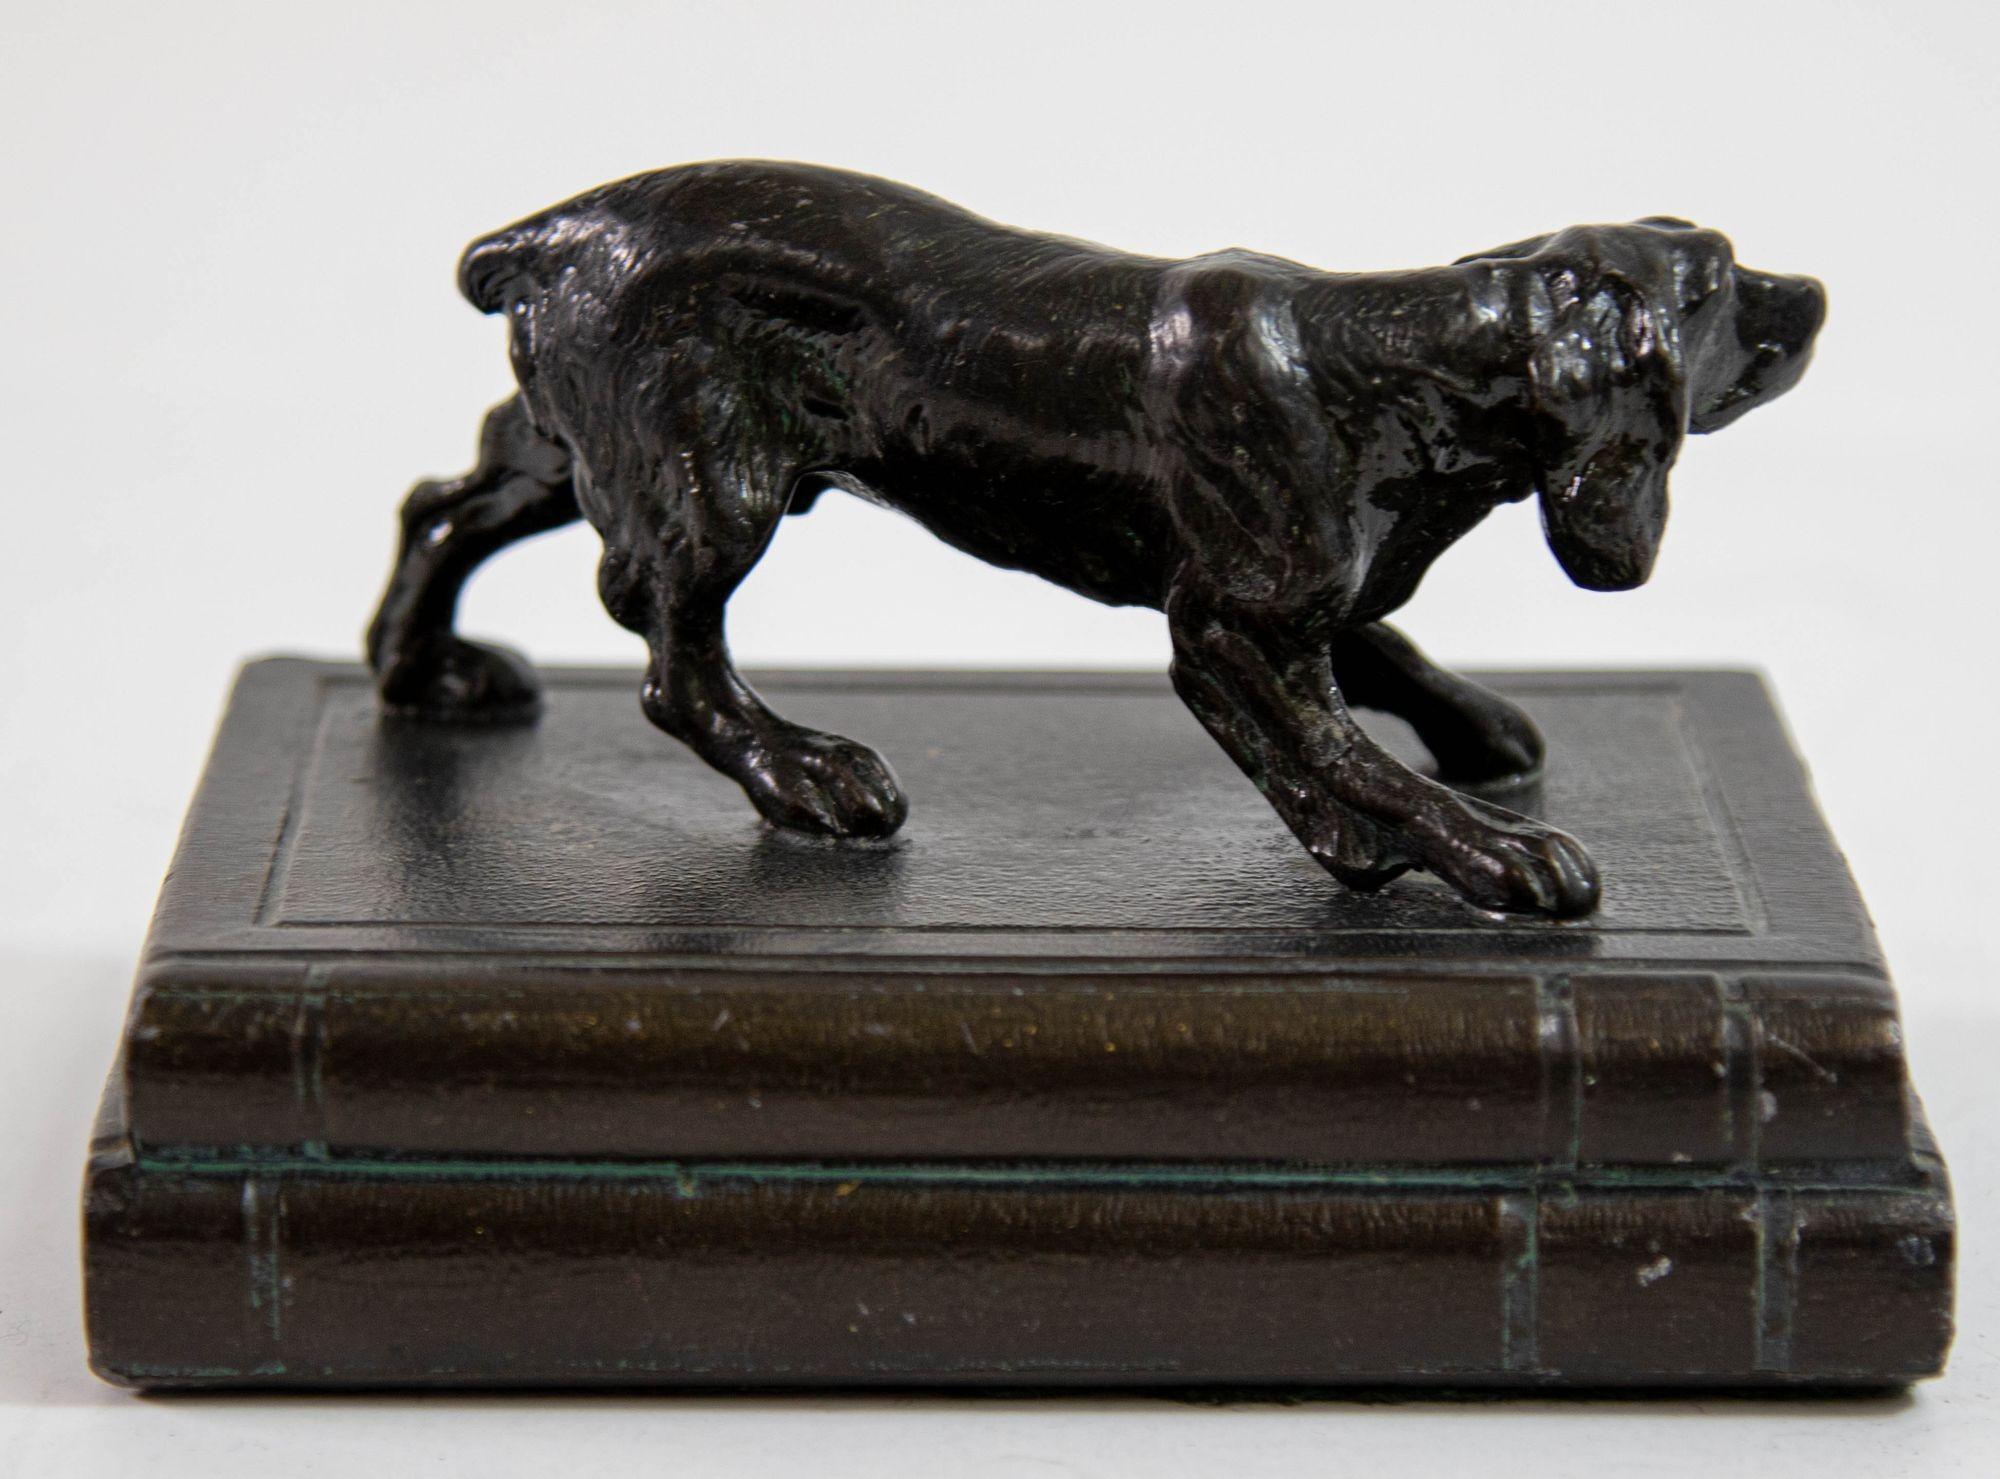 Hunting Dog Bronze Sculpture.English Spaniel Pointer Hunting Dog.This beautifully executed cast bronze figure of the hunt canine sculpture depicts a hunting setter.Vintage cast bronze bookend paperweight decorative art sculpture statue figural